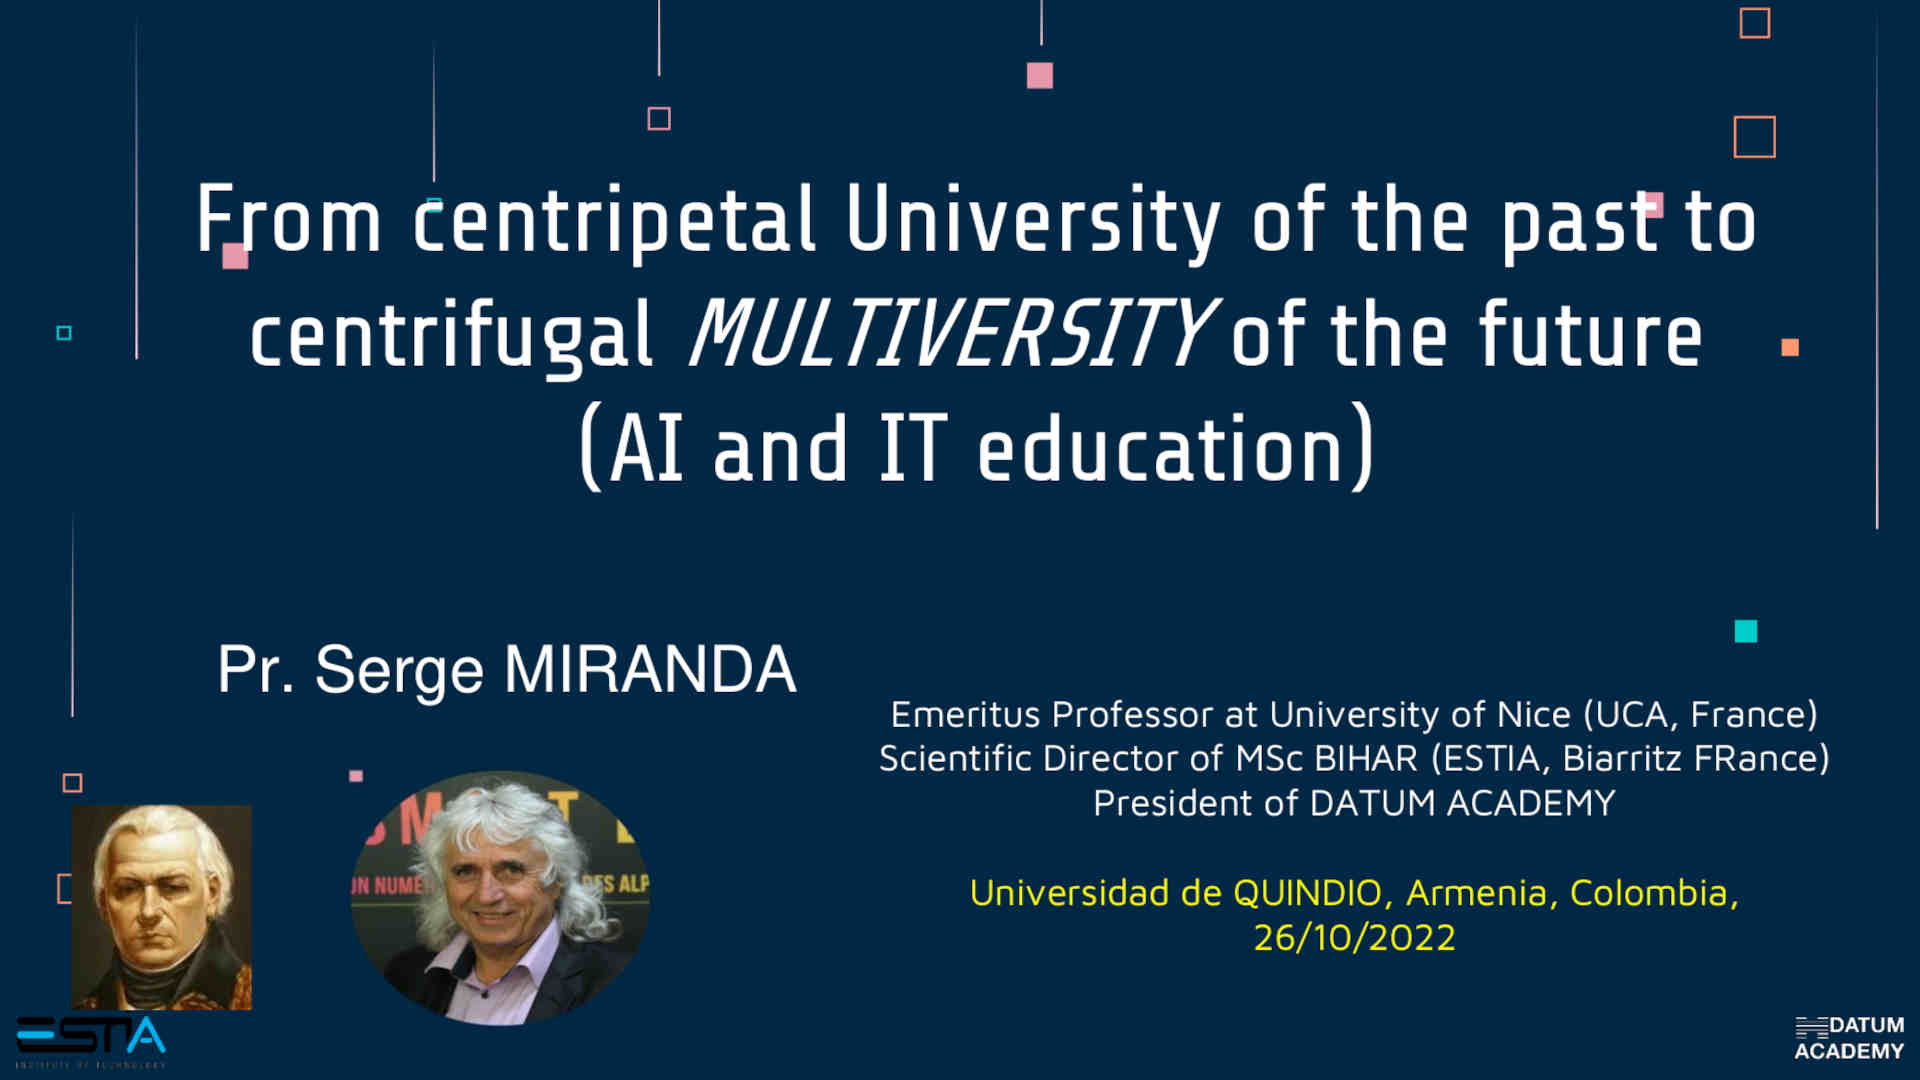 From centripetal University of the past to centrifugal MULTIVERSITY of the future